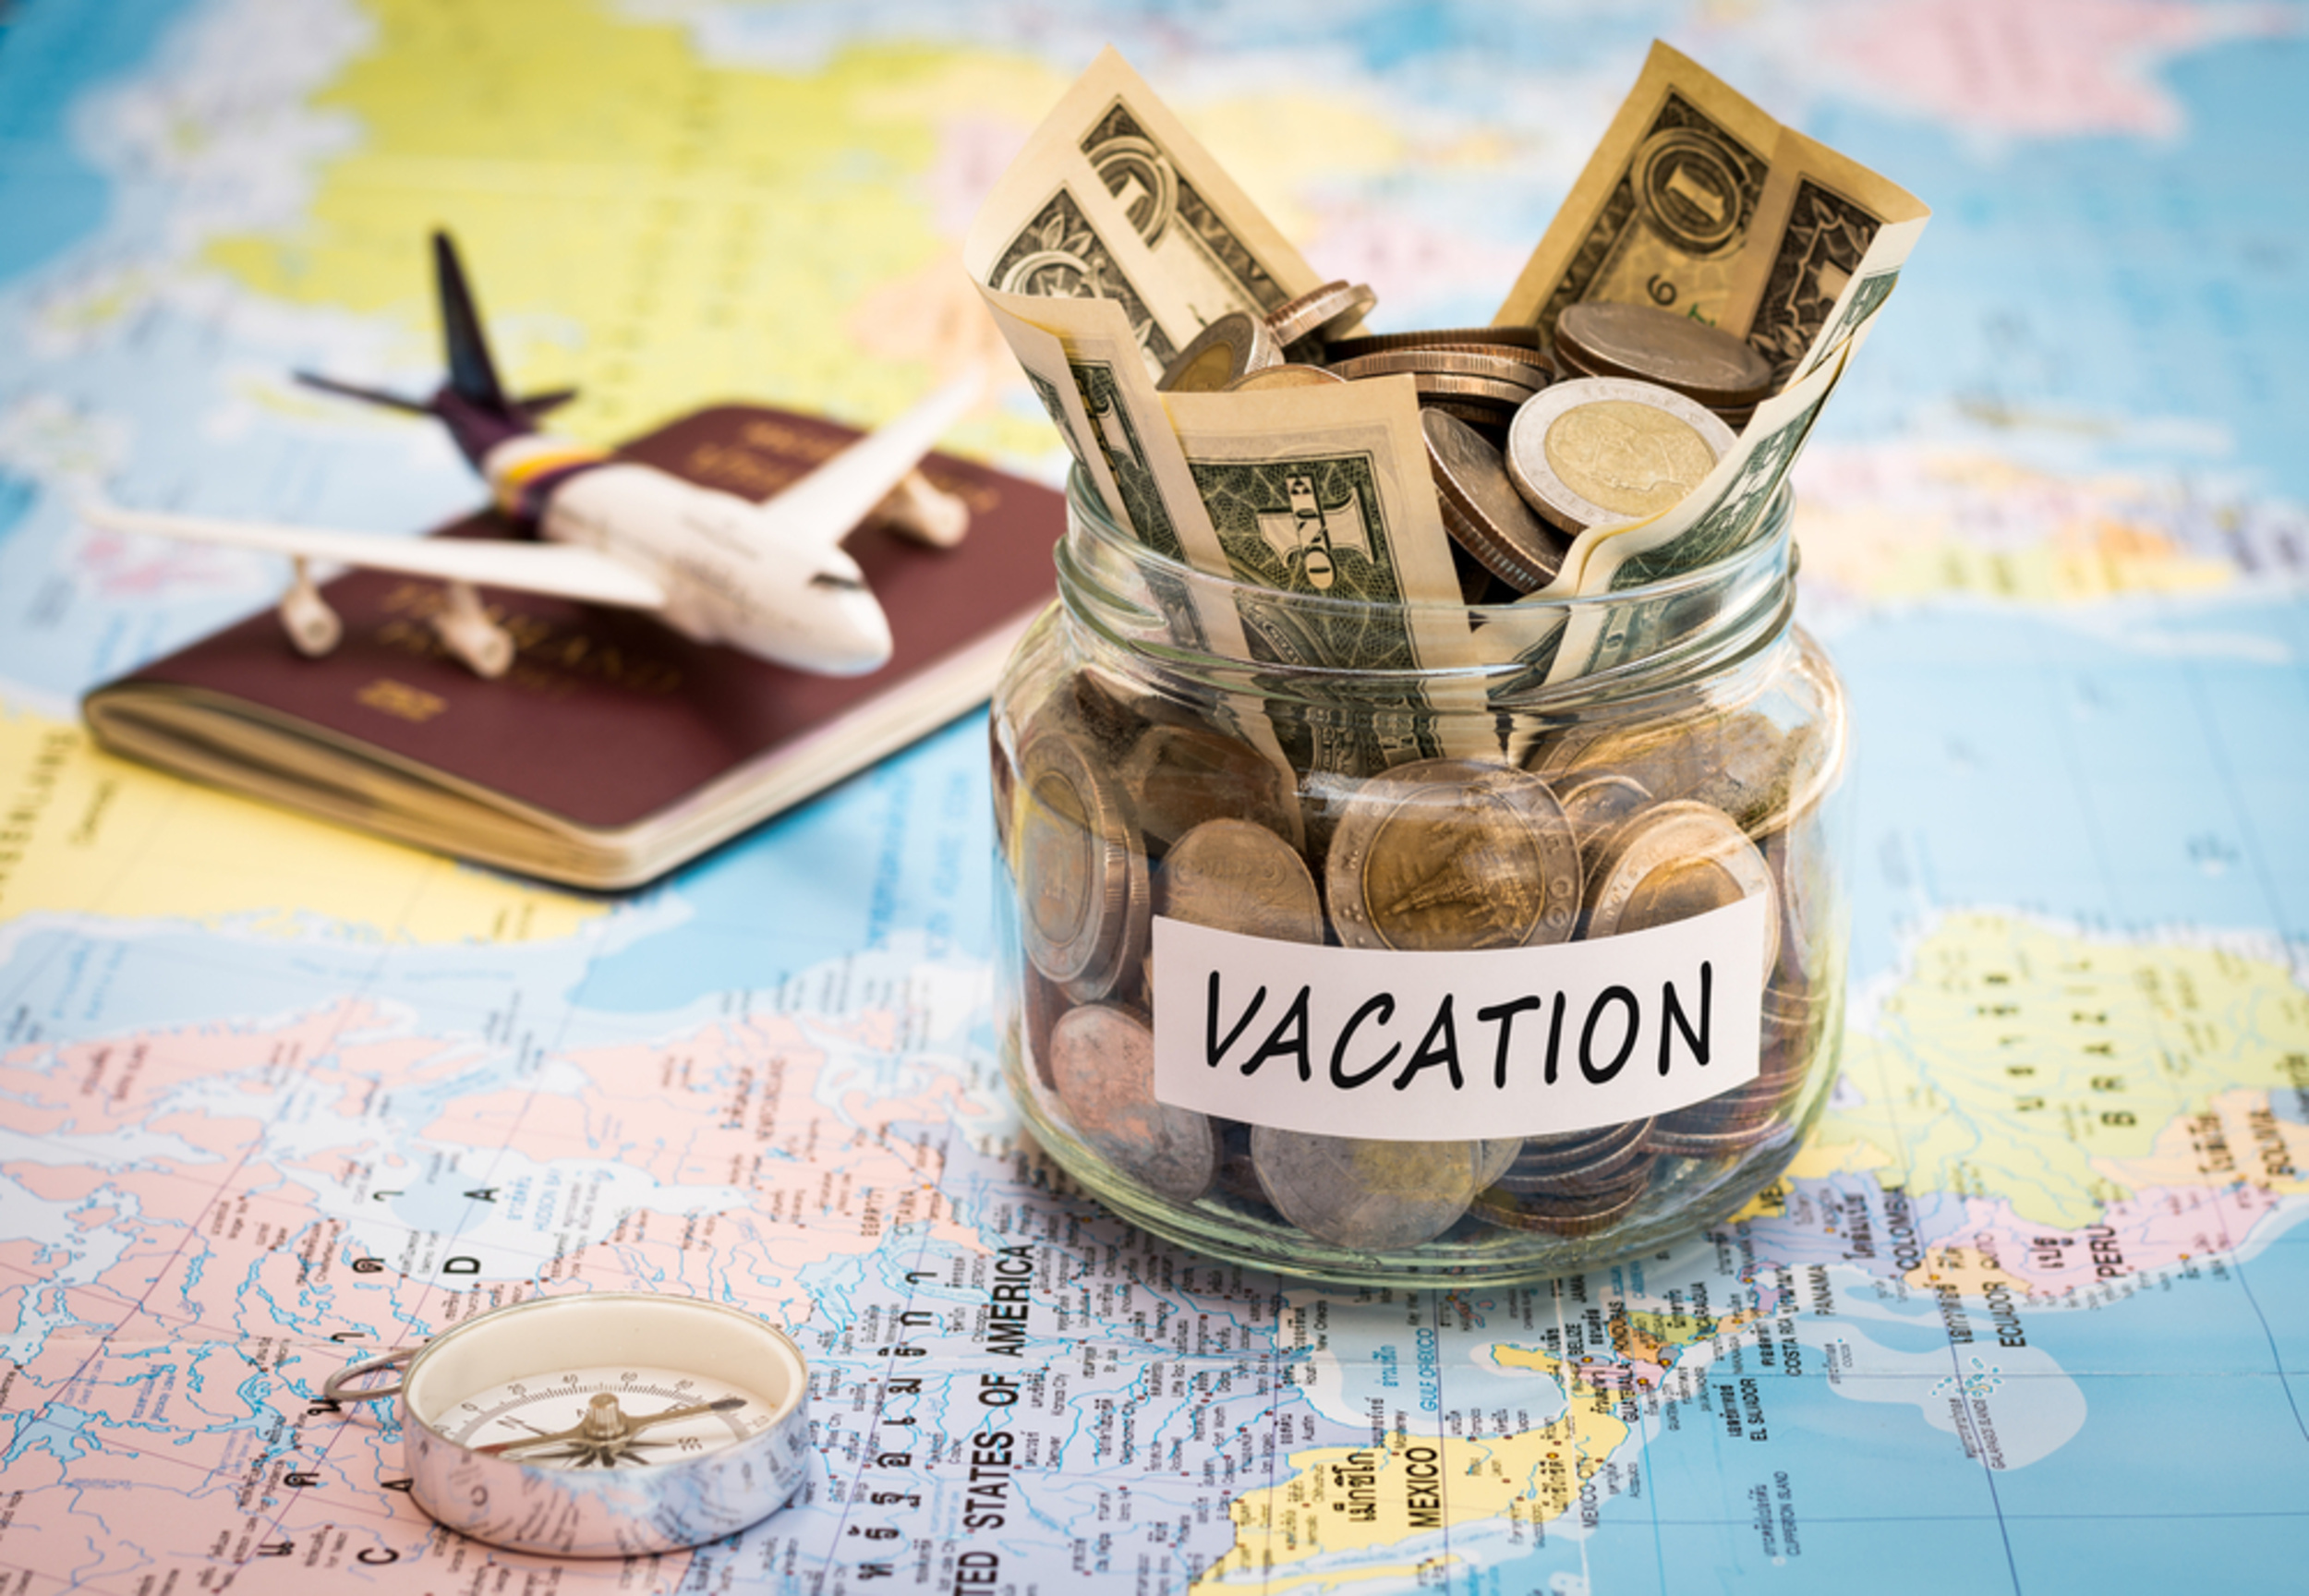 <p>Once your travel and accommodations are booked, make sure you budget enough cash to actually have a good time on vacation. It's possible to do that on a shoestring budget, just make sure that you've got a few nice meals and some emergency cash for incidentals that pop up along the way. </p><p><a href='https://www.msn.com/en-us/community/channel/vid-cj9pqbr0vn9in2b6ddcd8sfgpfq6x6utp44fssrv6mc2gtybw0us'>Follow us on MSN to see more of our exclusive lifestyle content.</a></p>